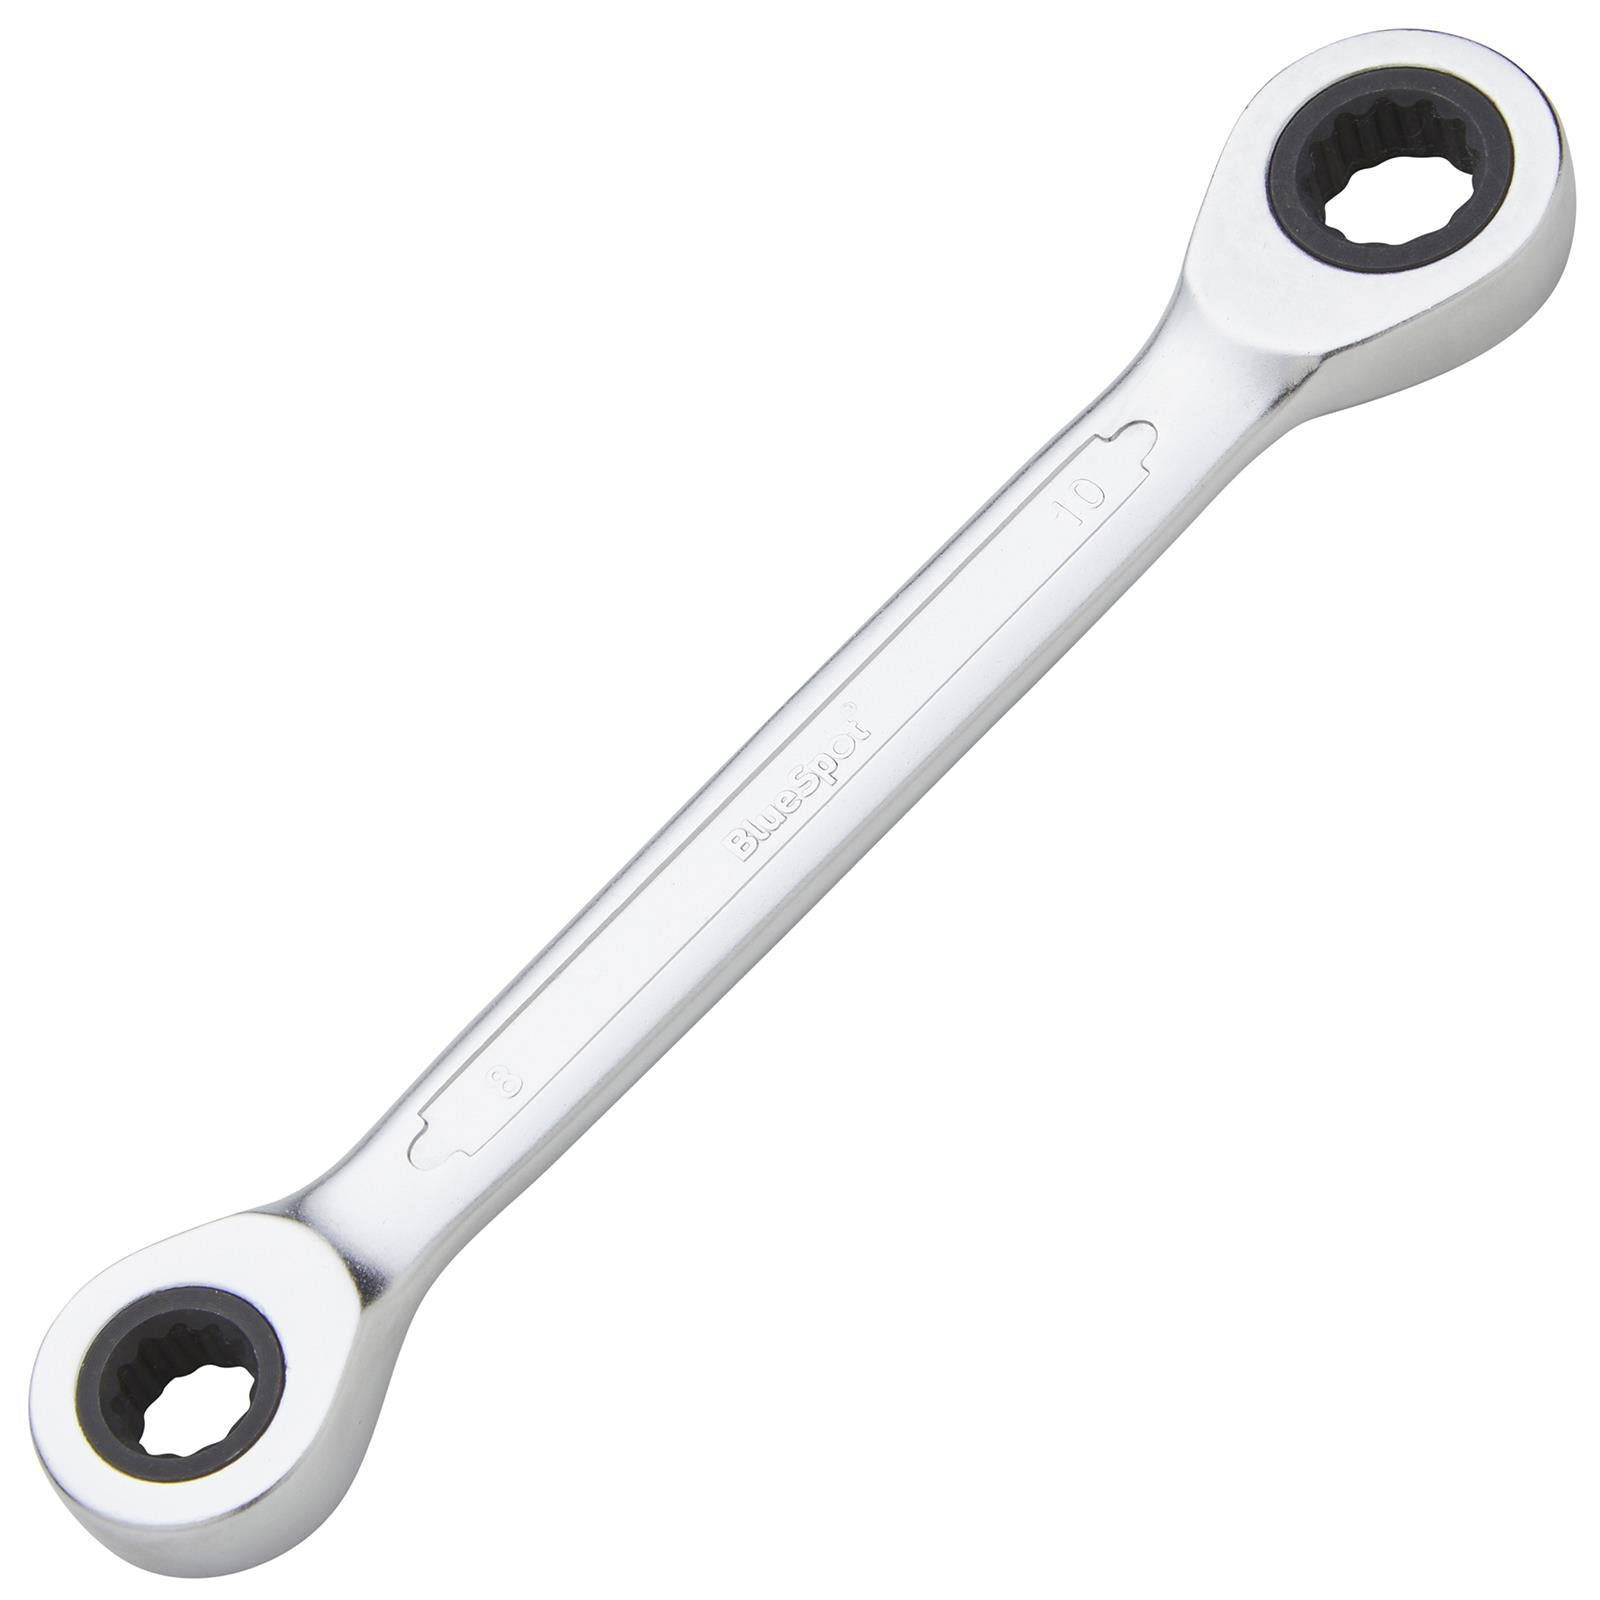 BlueSpot Ratchet Ring Spanner Double End 8mm x 10mm 72 Tooth